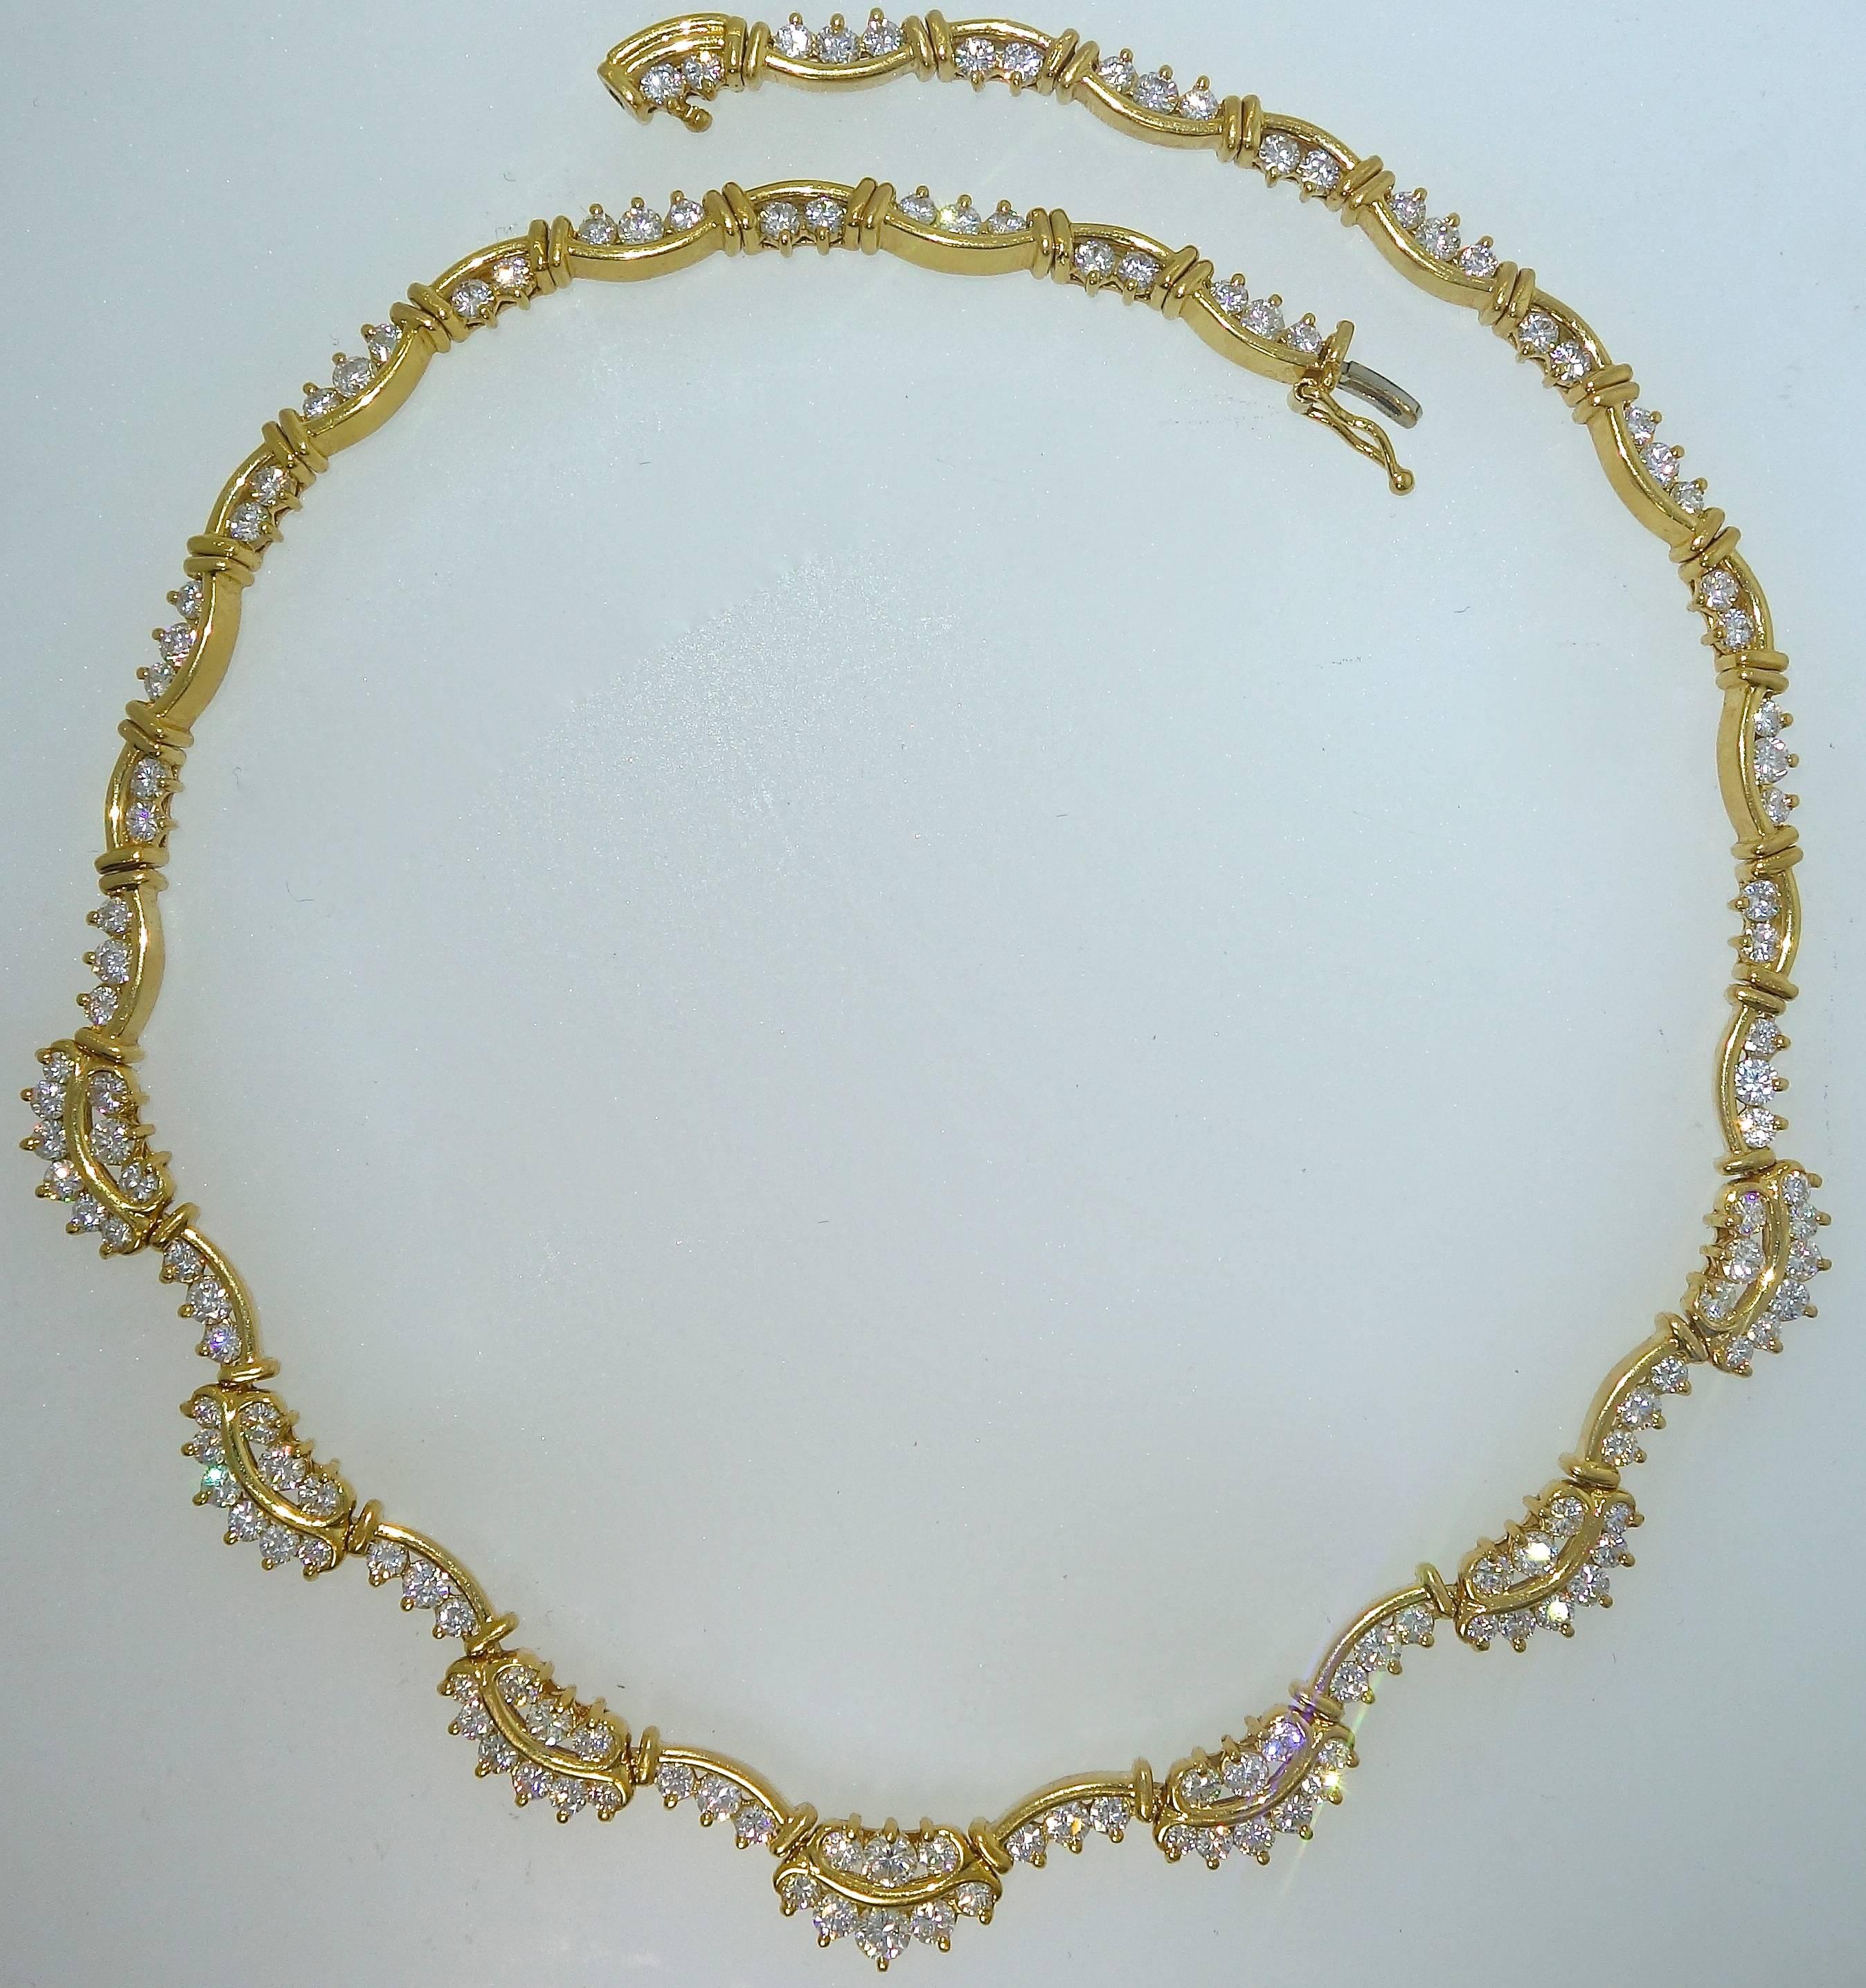 18K yellow gold necklace with 138 fine white diamonds - all near colorless and very slightly included (H,VS).  There is a total of 9.2 cts.  This necklace weighs 51.15 grams, it is 14.75 inches long and 1.8 inch wide.  The delicate scroll pattern